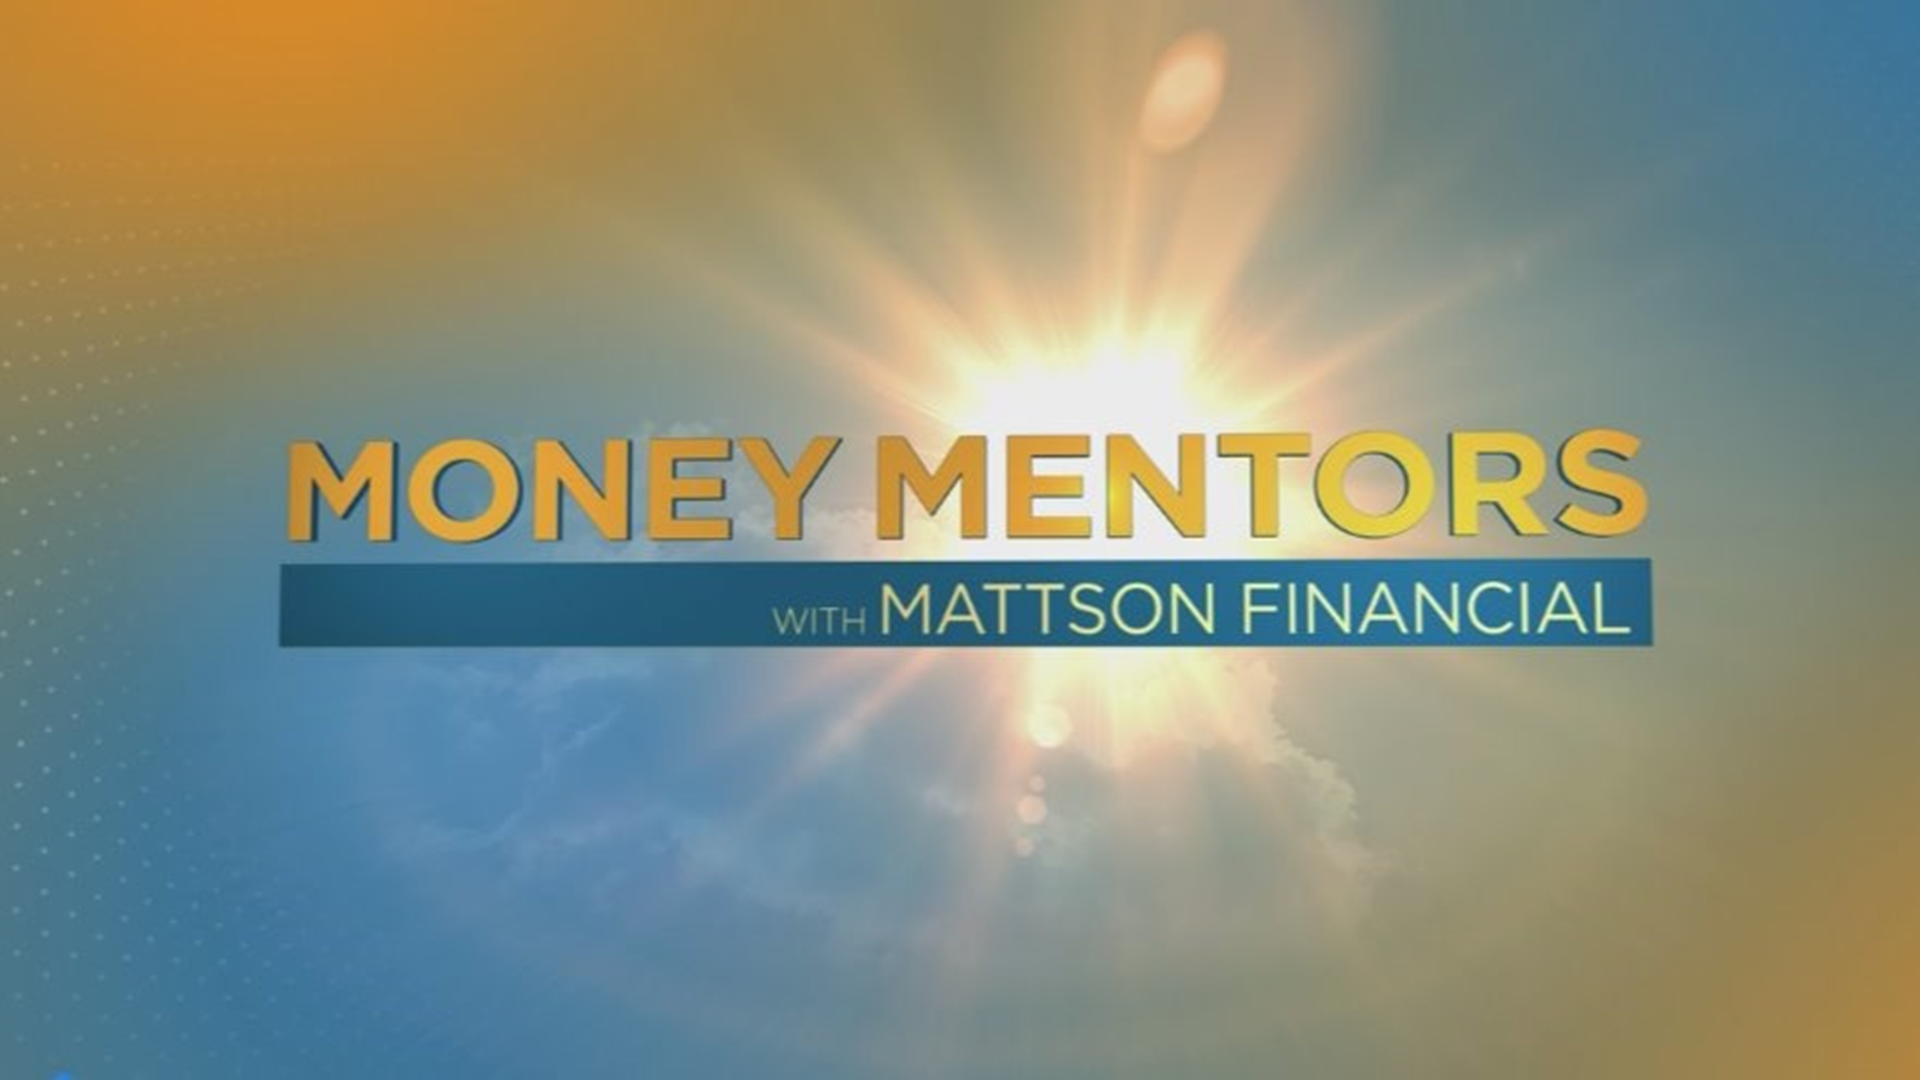 If you’ve been invested in the stock market, you’ve probably been celebrating what’s happened to your money. But the experts will tell you, a correction will one day arrive. We asked our Money Mentors to explain why that is and what we can do to reduce our risk.